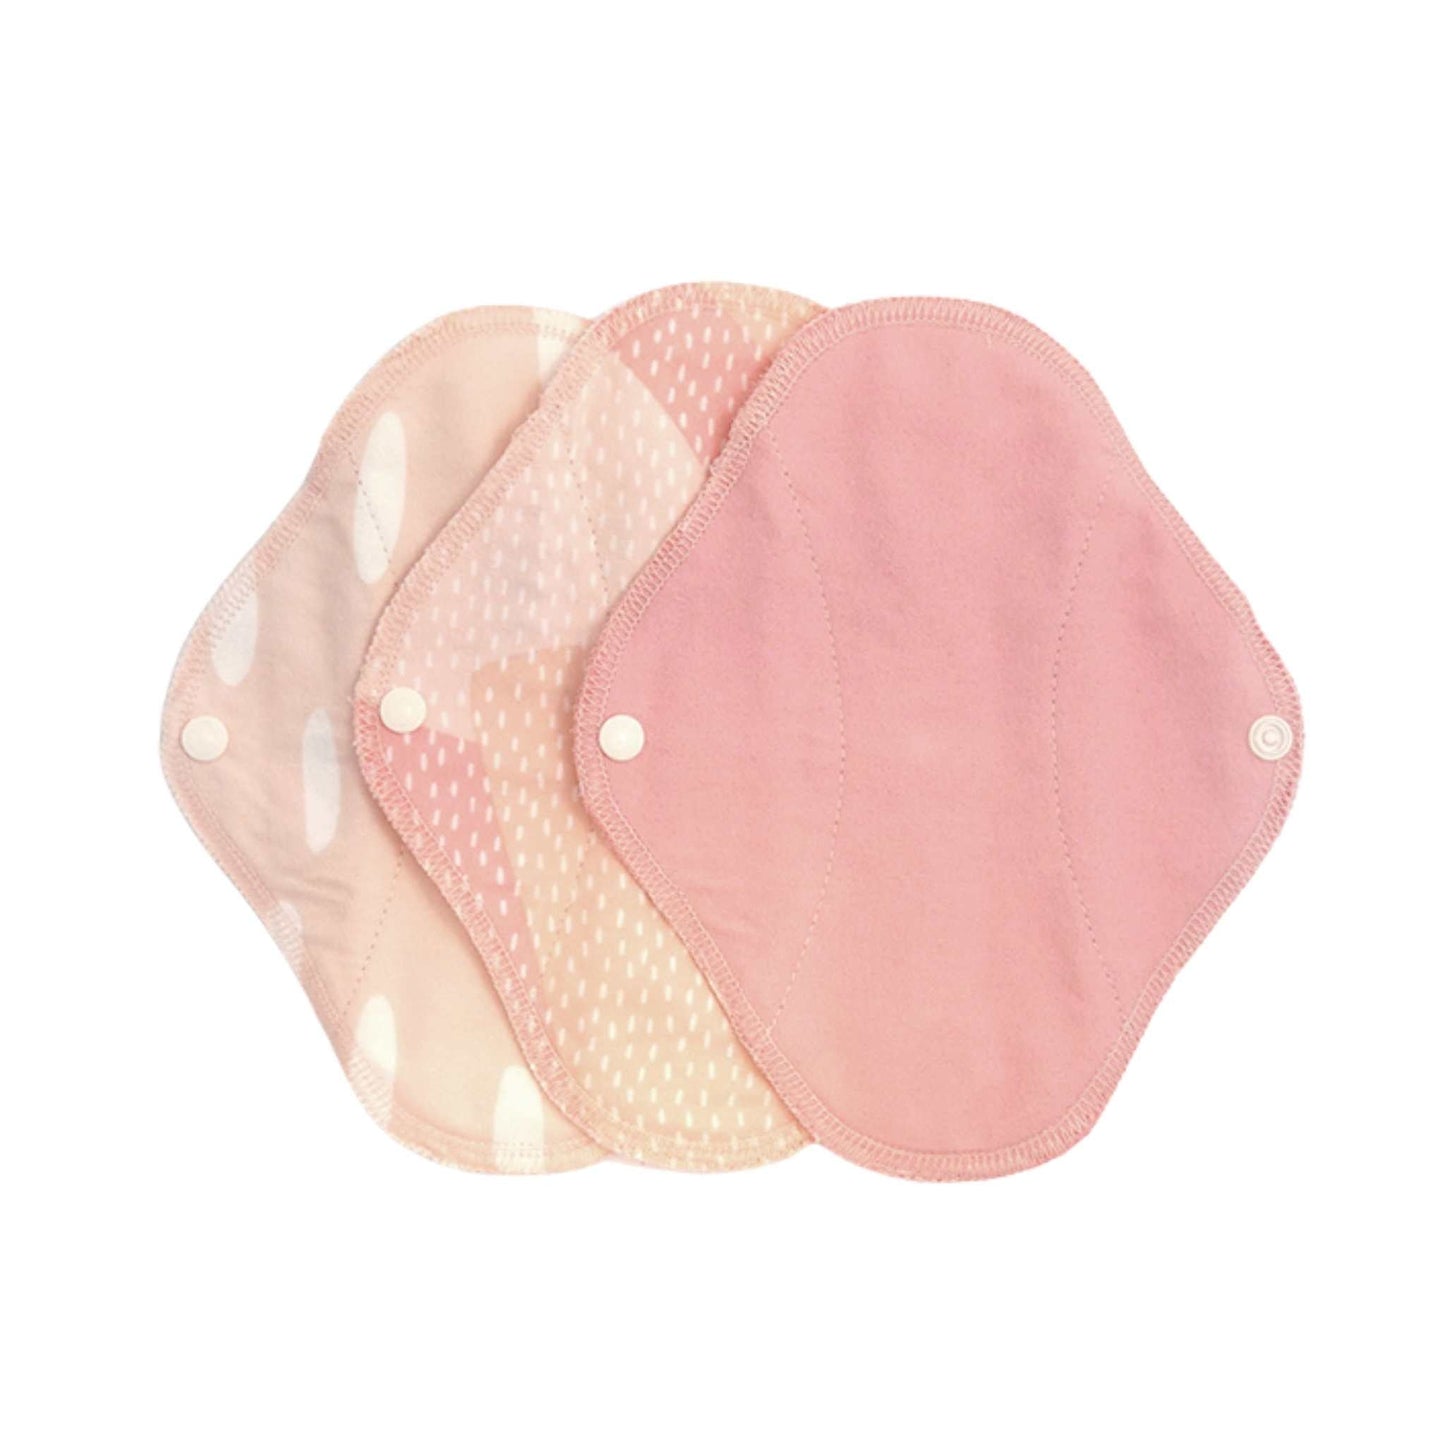 Imse Vimse Period Care Pink Sprinkle Reusable Cloth Pantyliner 3-Pack  - Classic - Imse Vimse